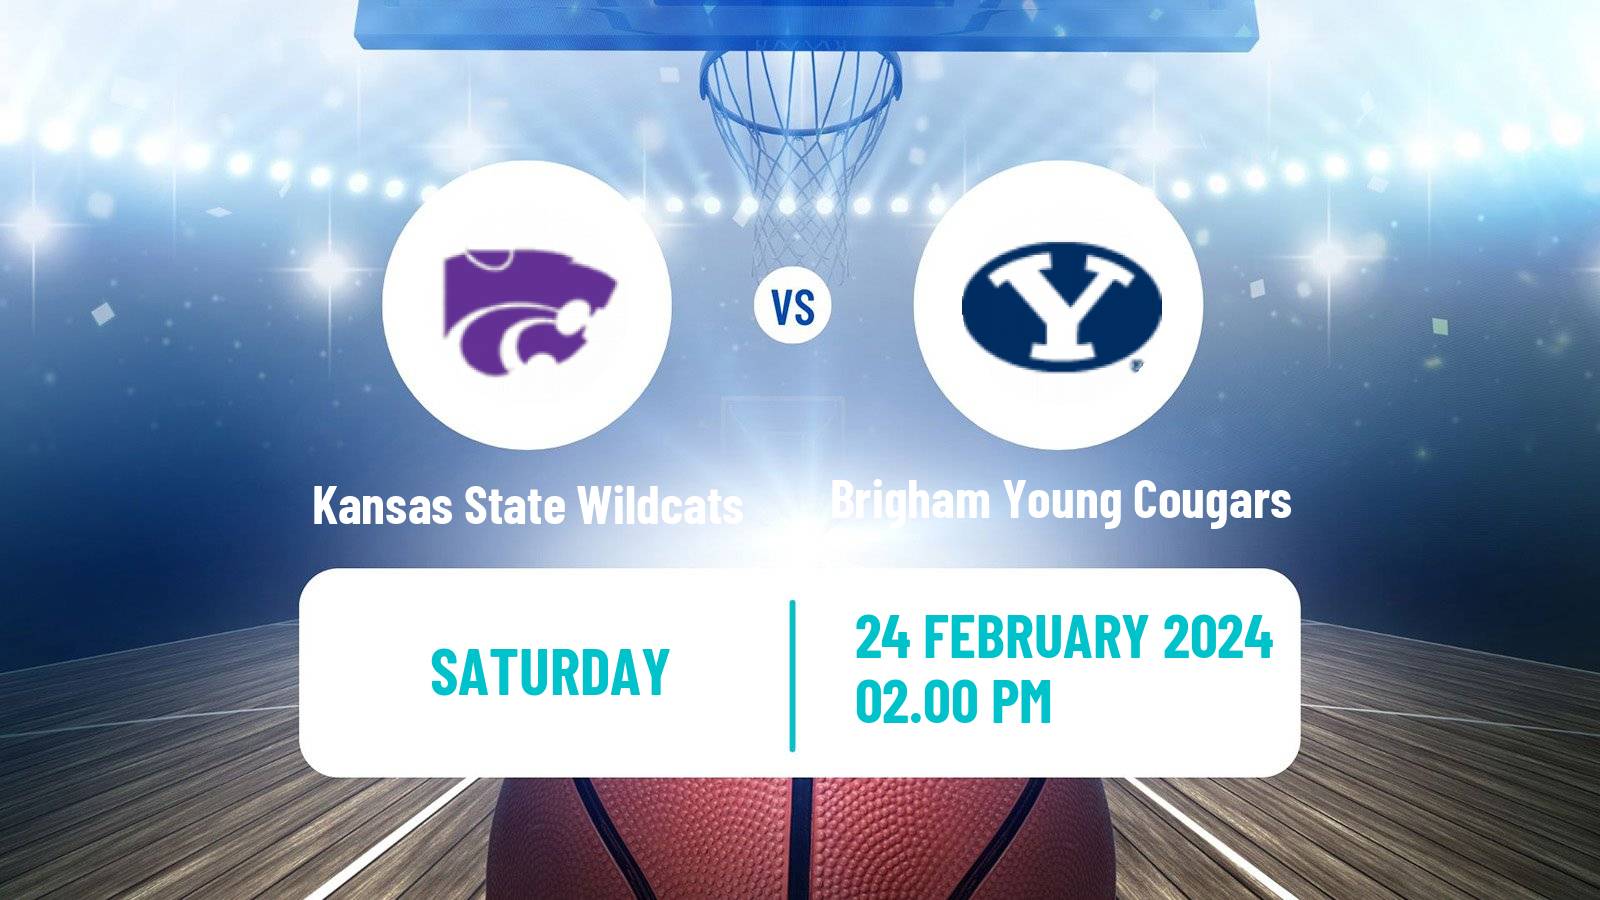 Basketball NCAA College Basketball Kansas State Wildcats - Brigham Young Cougars